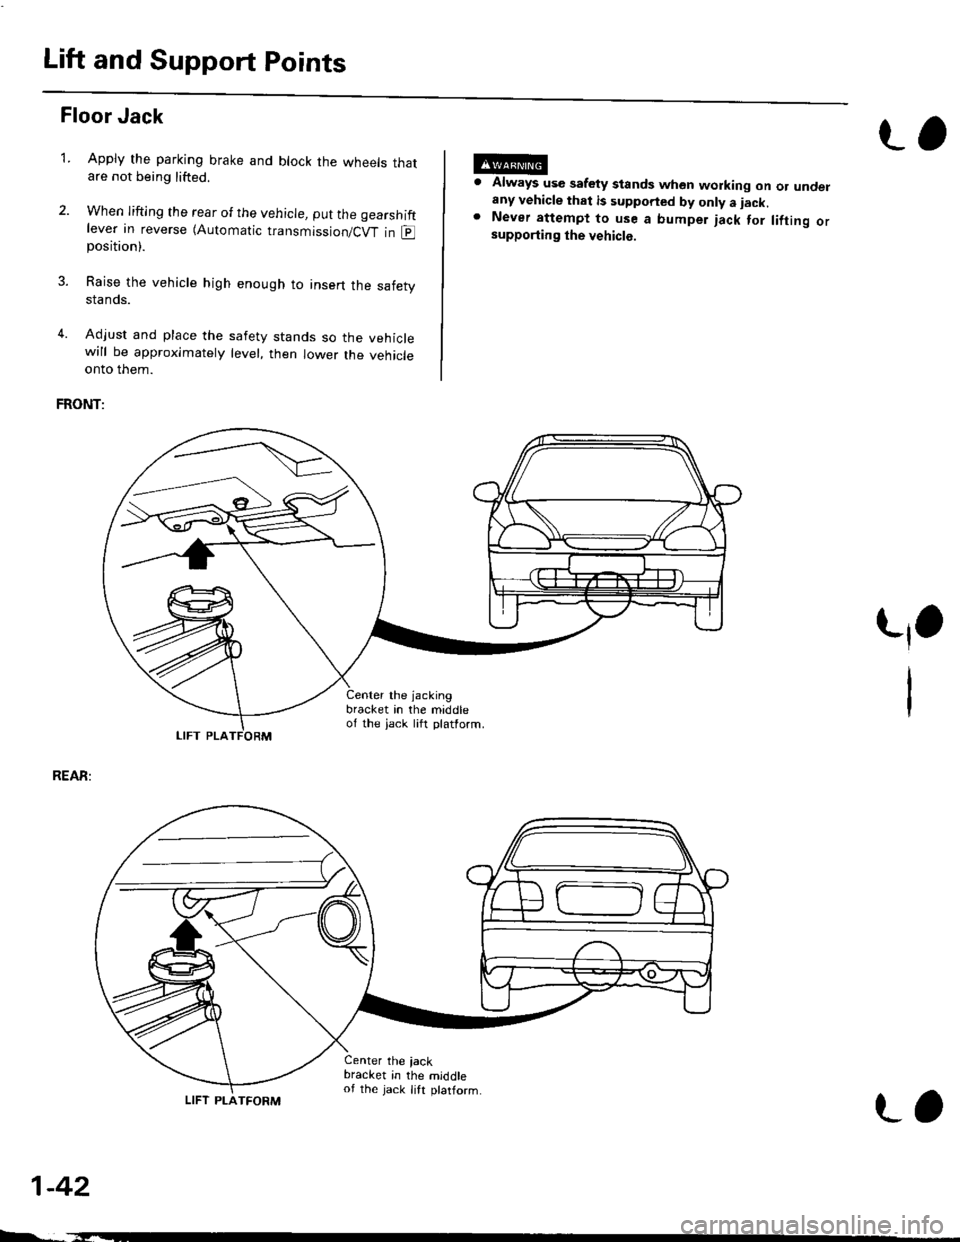 HONDA CIVIC 1998 6.G Workshop Manual Lift and Support Points
Floor Jack
Apply the parking brake and block the wheets thatare not being lifted.
When lifting the rear of the vehicle, put the gearshiftlever in reverse (Automatic transmissio